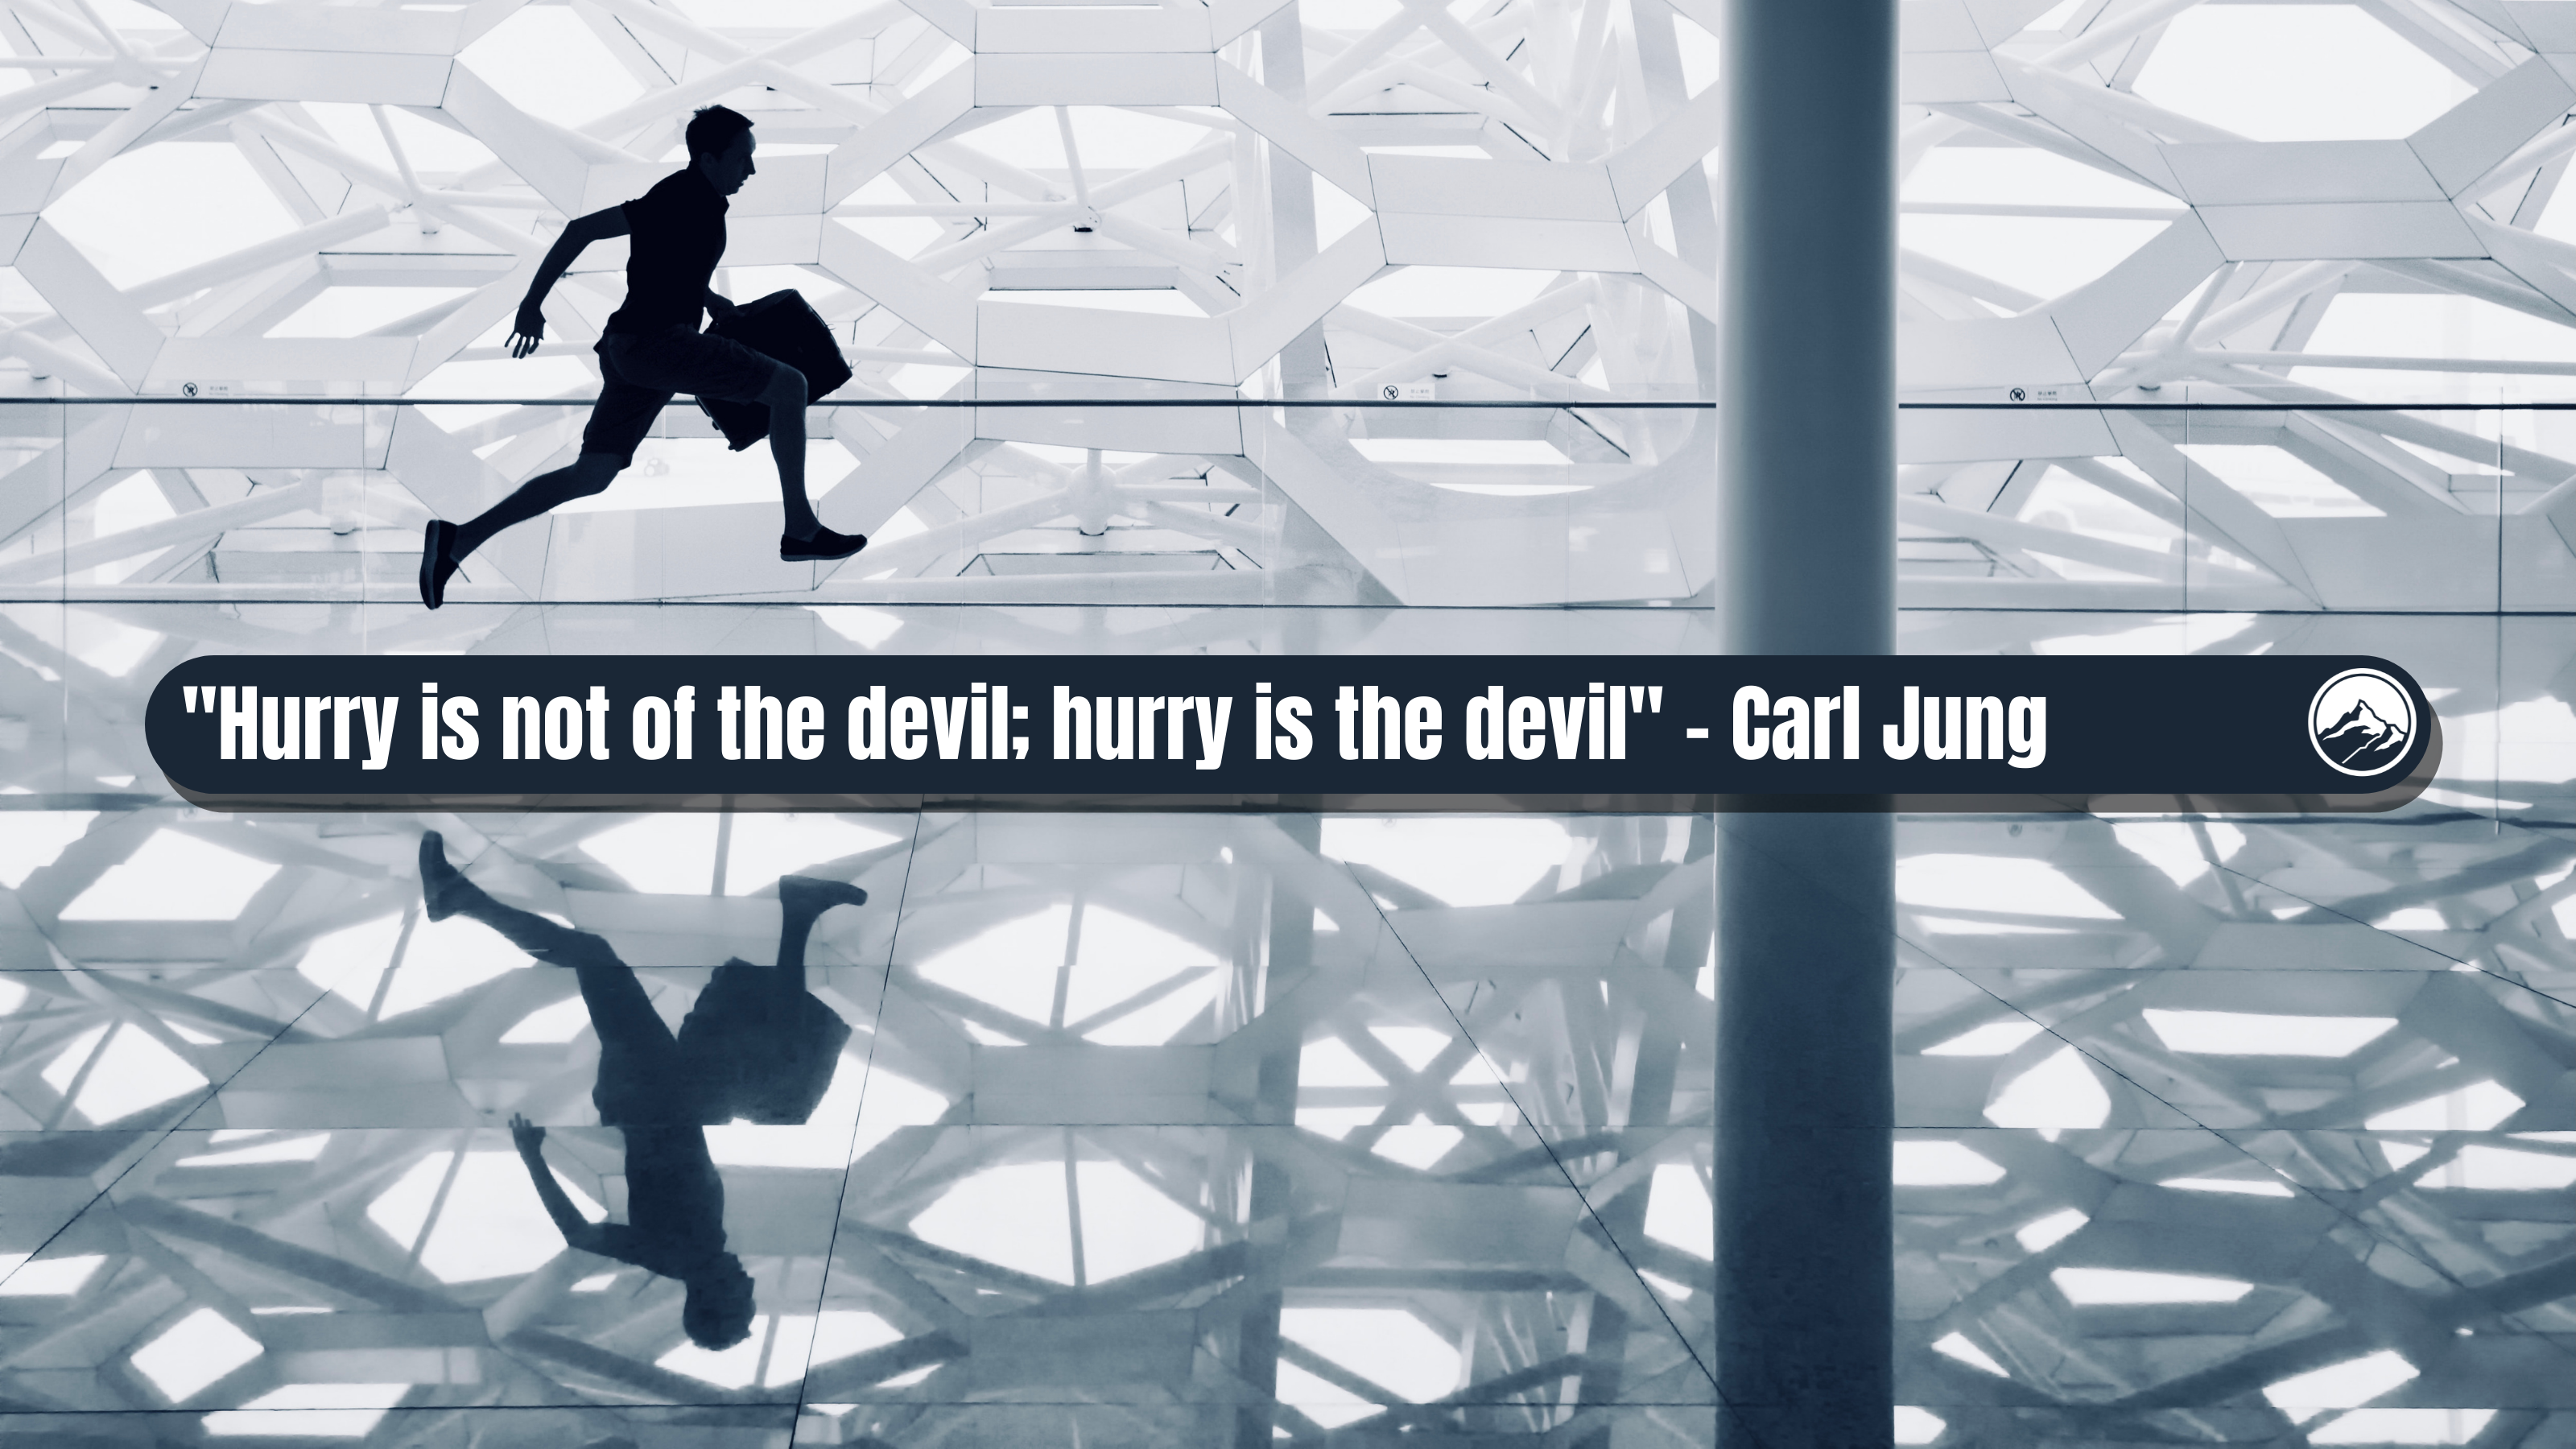 Hurry is not of the devil; hurry is the devil - Carl Jung